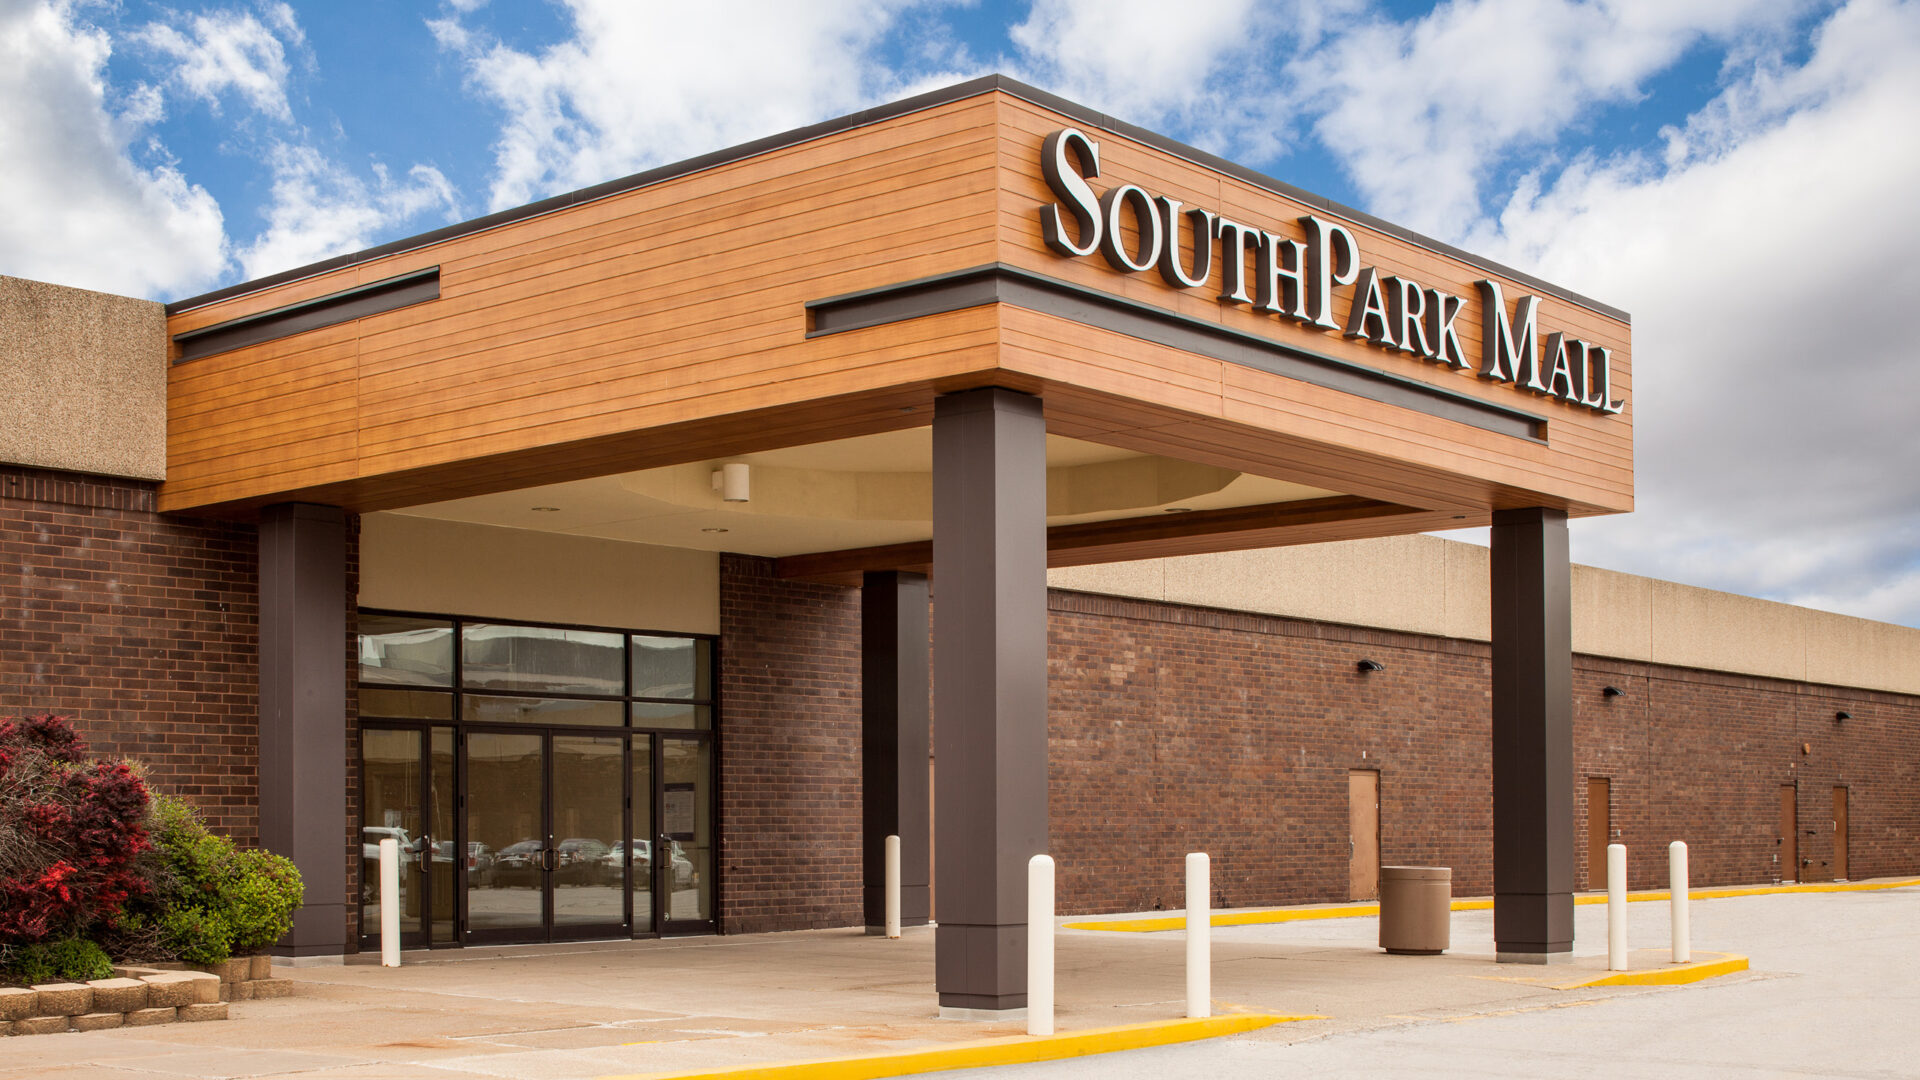 SouthPark Mall - Russell Group Construction & Development